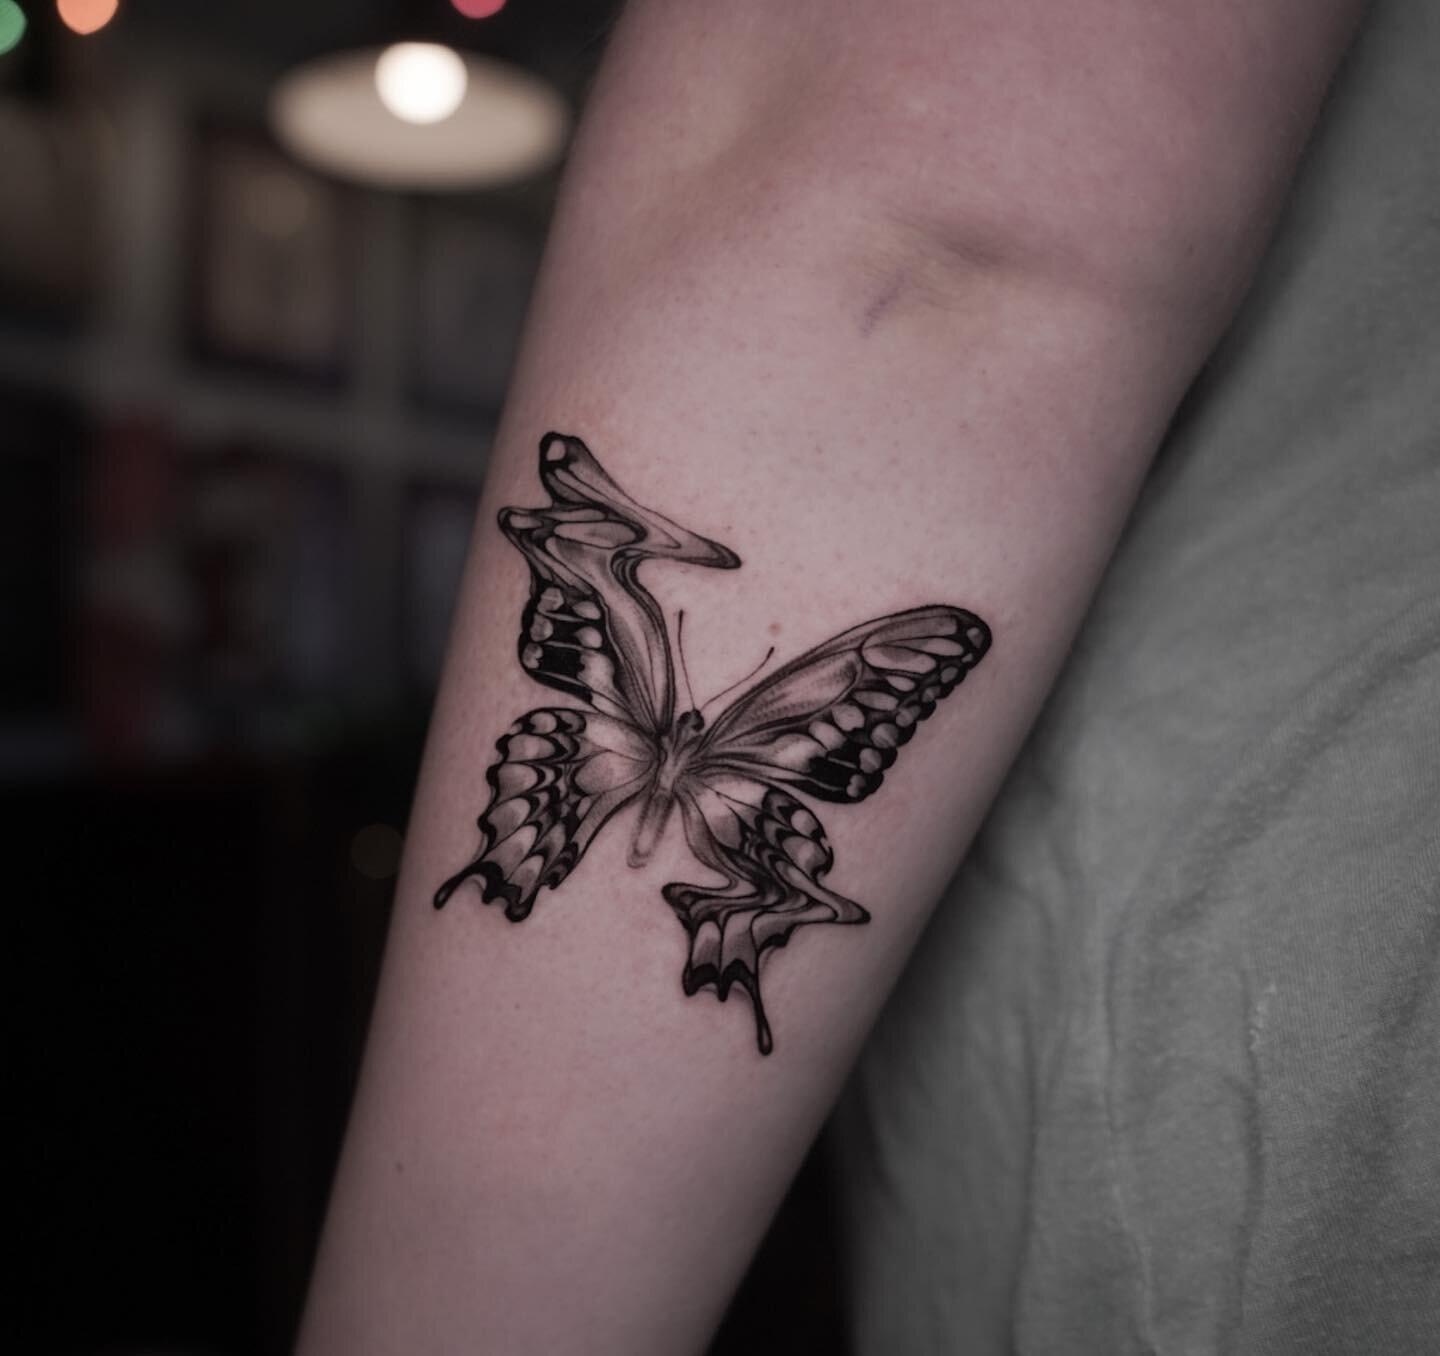 A little glitch butterfly from my flash sheet! Thank you again, Jess; you&rsquo;re the best ❤️🙏
|
|
|
|
|
|
#butterflytattoo #surrealism #surrealtattoo #mothtattoo #abstracttattoo #abstractbutterfly #bugtattoo #armtattoo #temeculatattoo #blackink #b